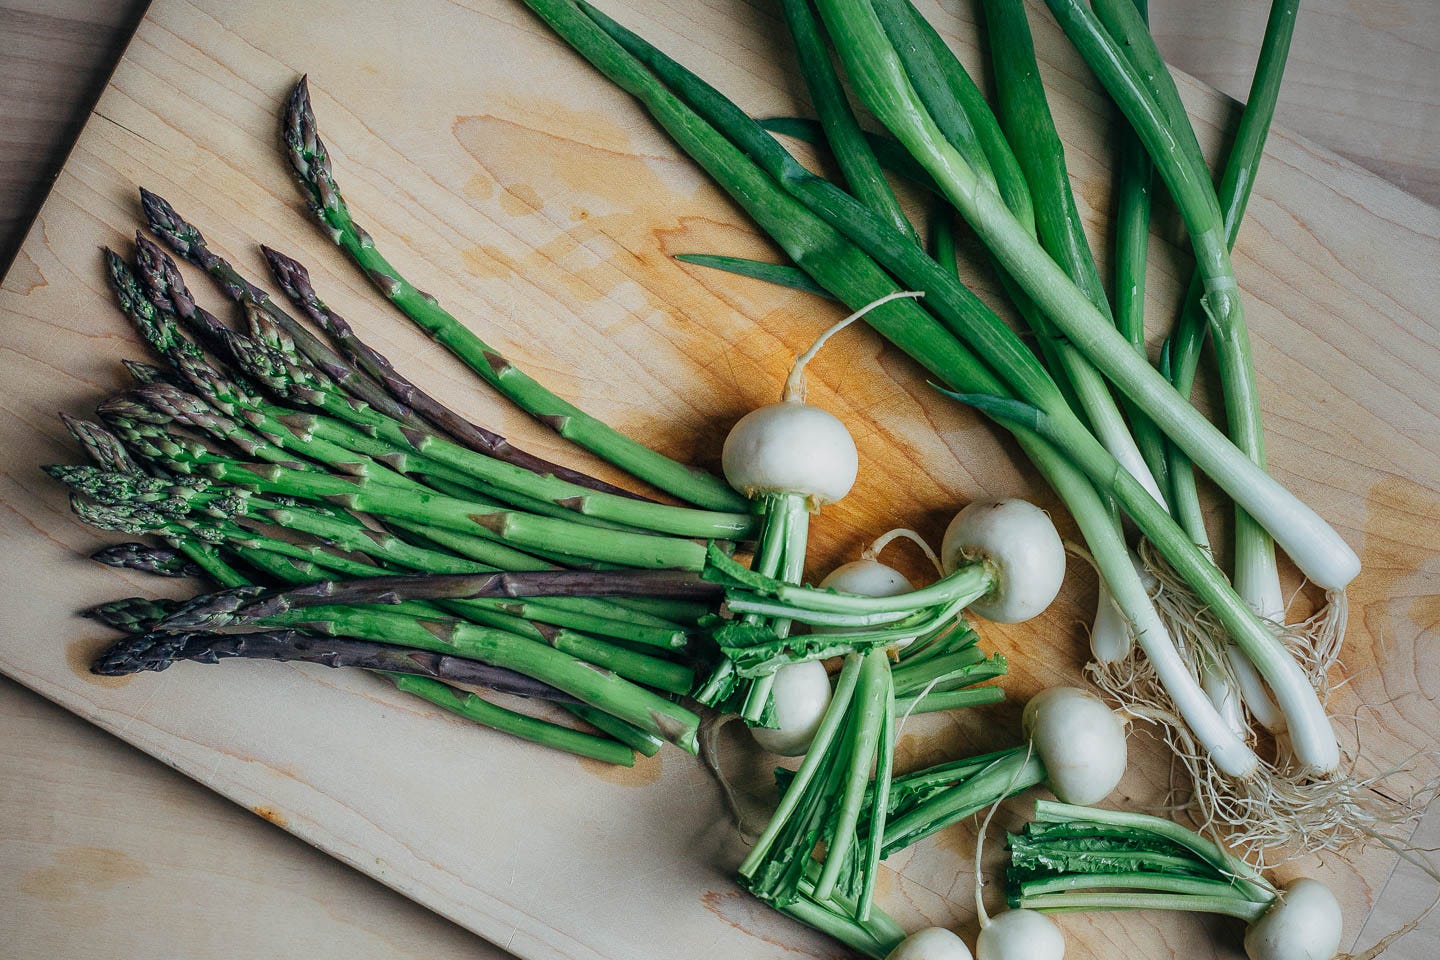 A cutting board with turnips, spring onions, and asparagus